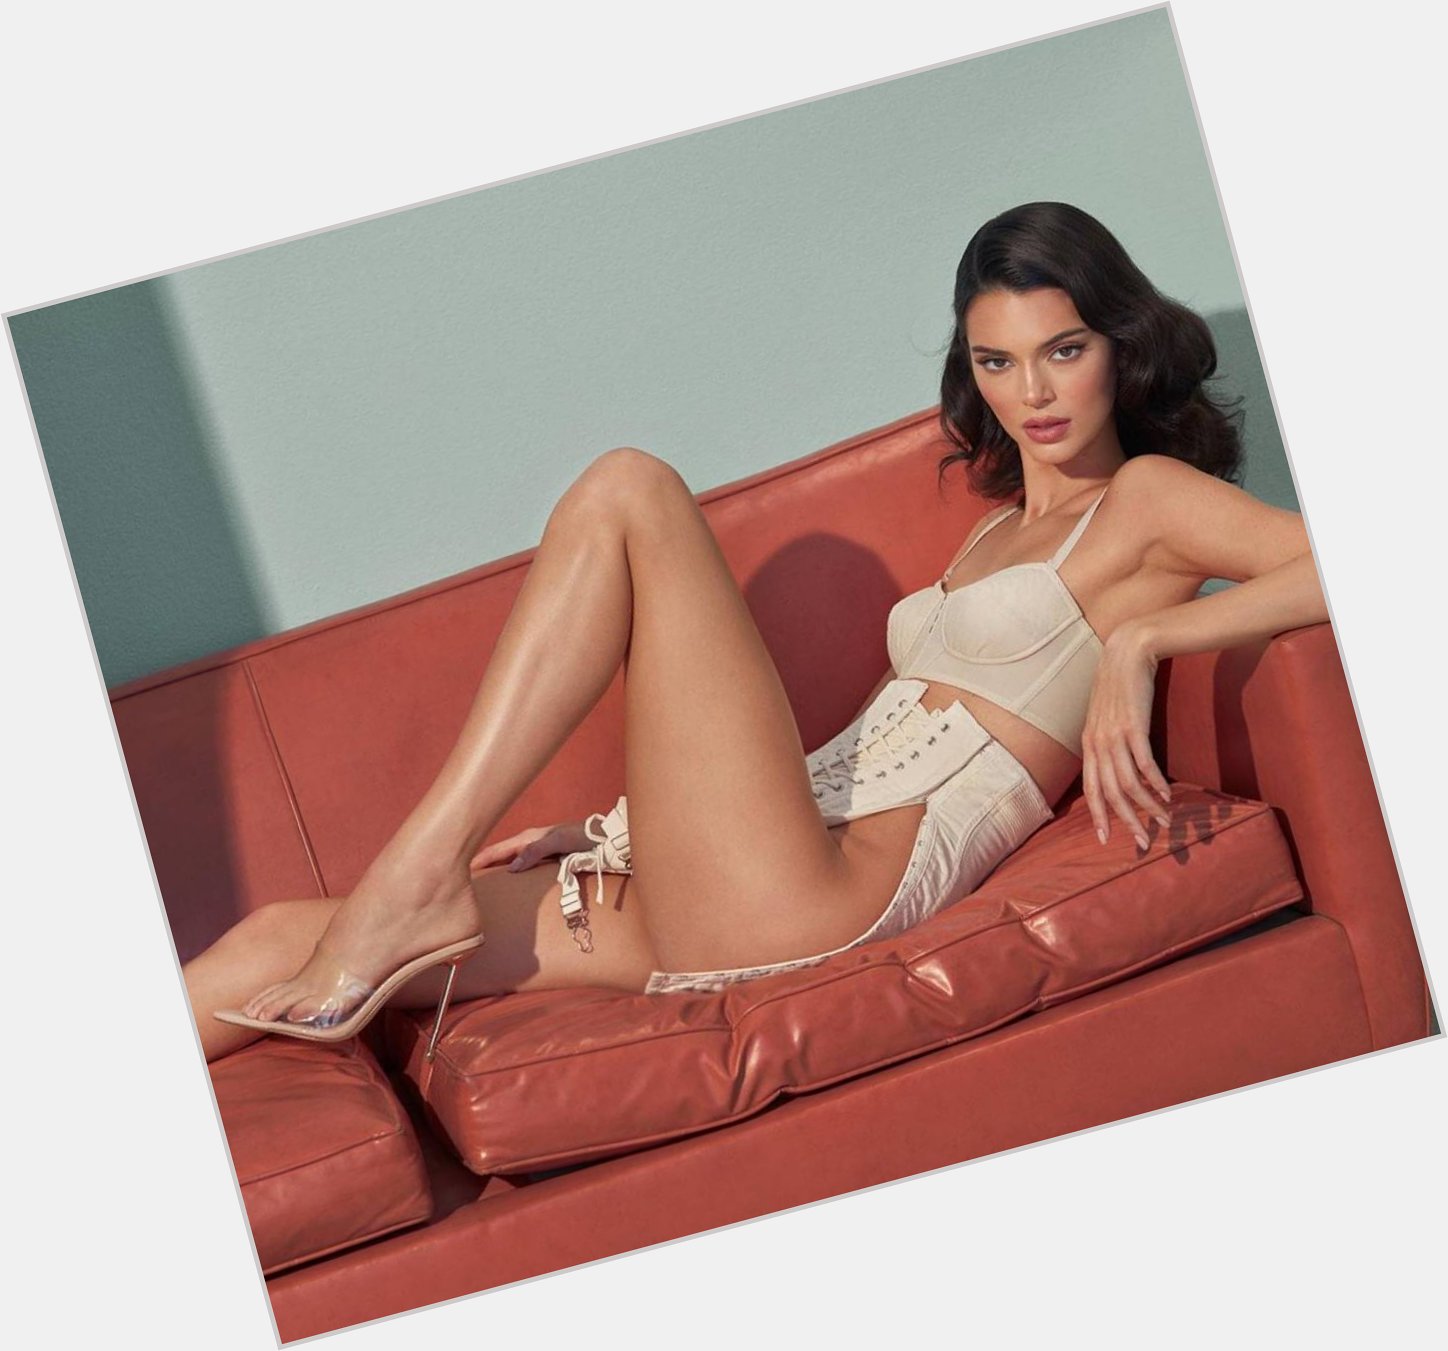 Happy Birthday to ...  Model - Kendall Jenner Who is 27yo today!
(2020 below) 